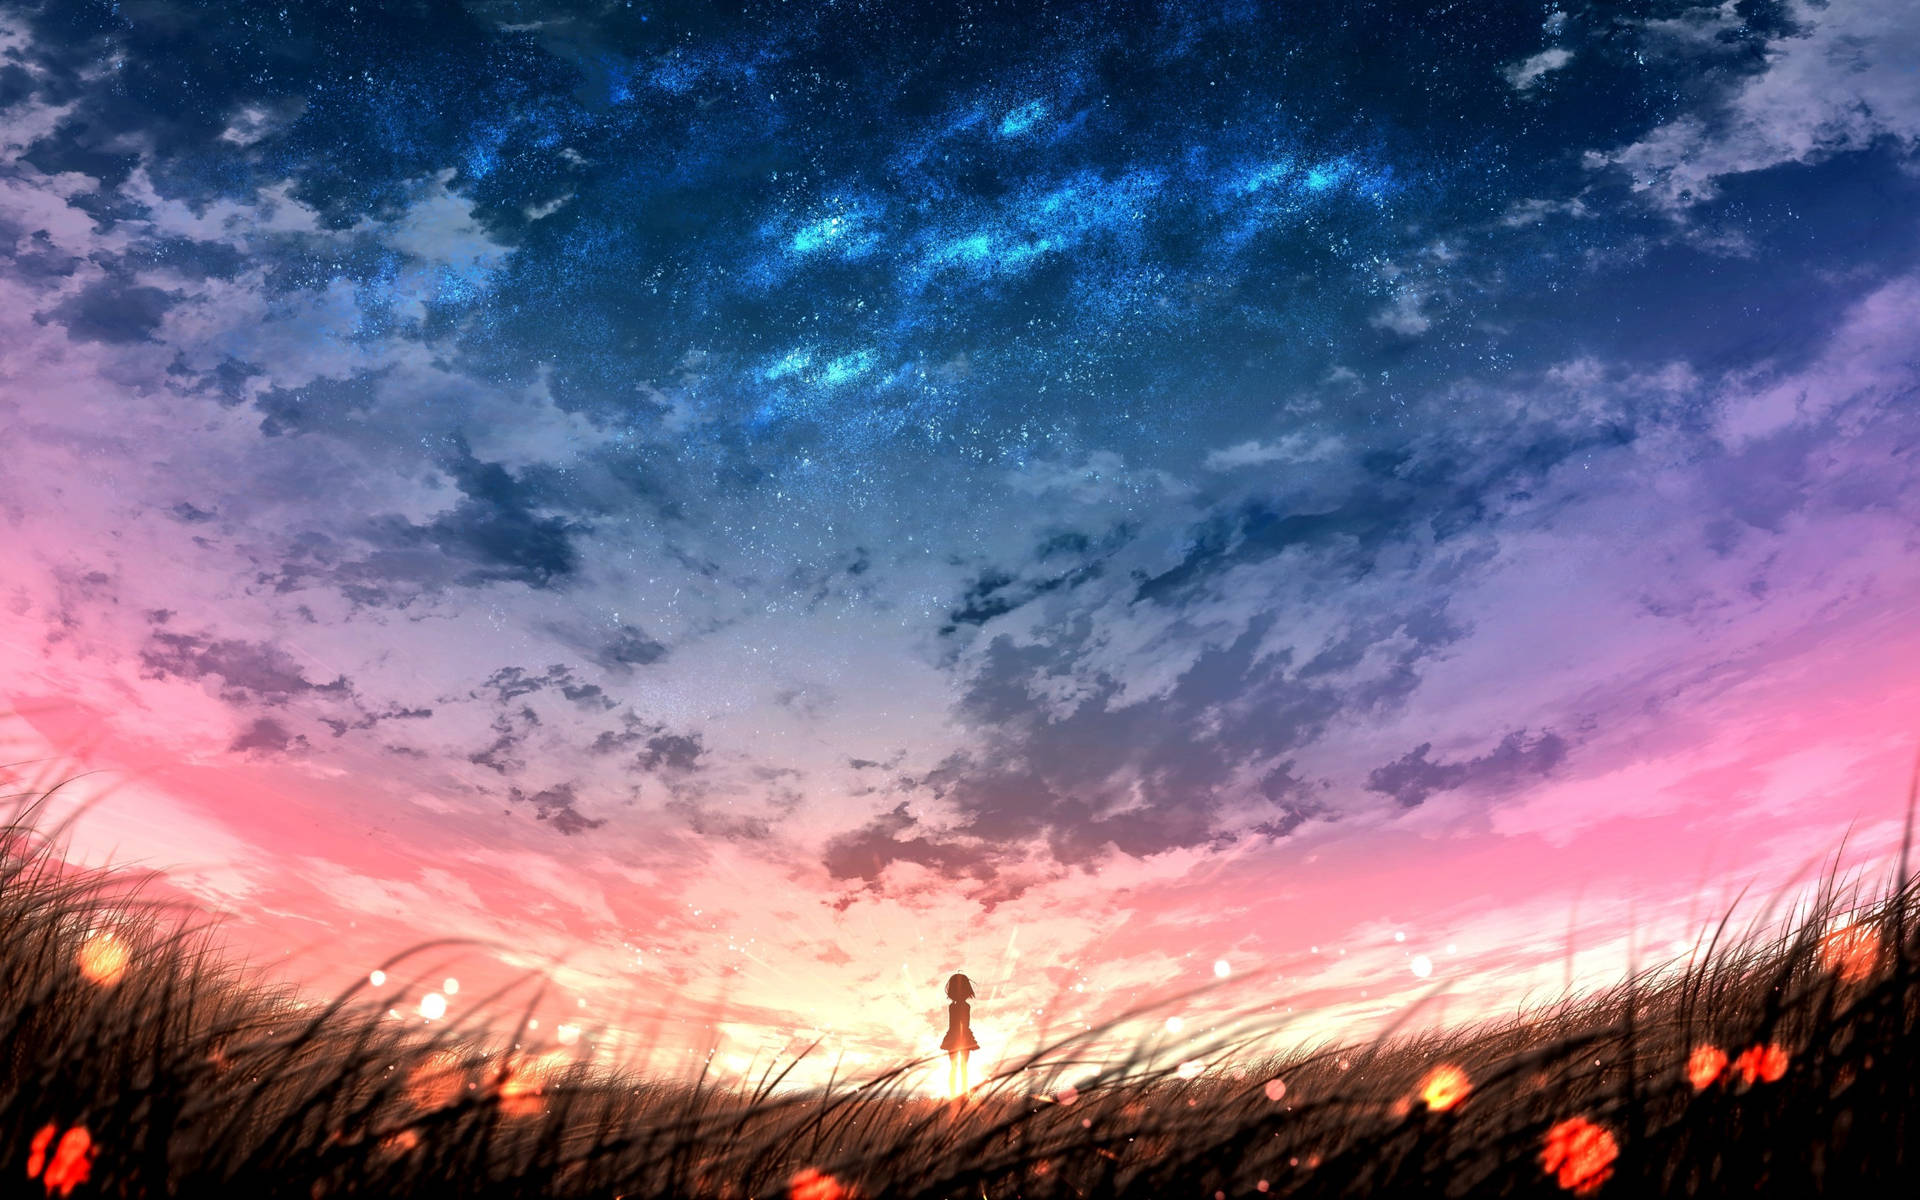 Sunset Sky With Galaxy Wallpaper